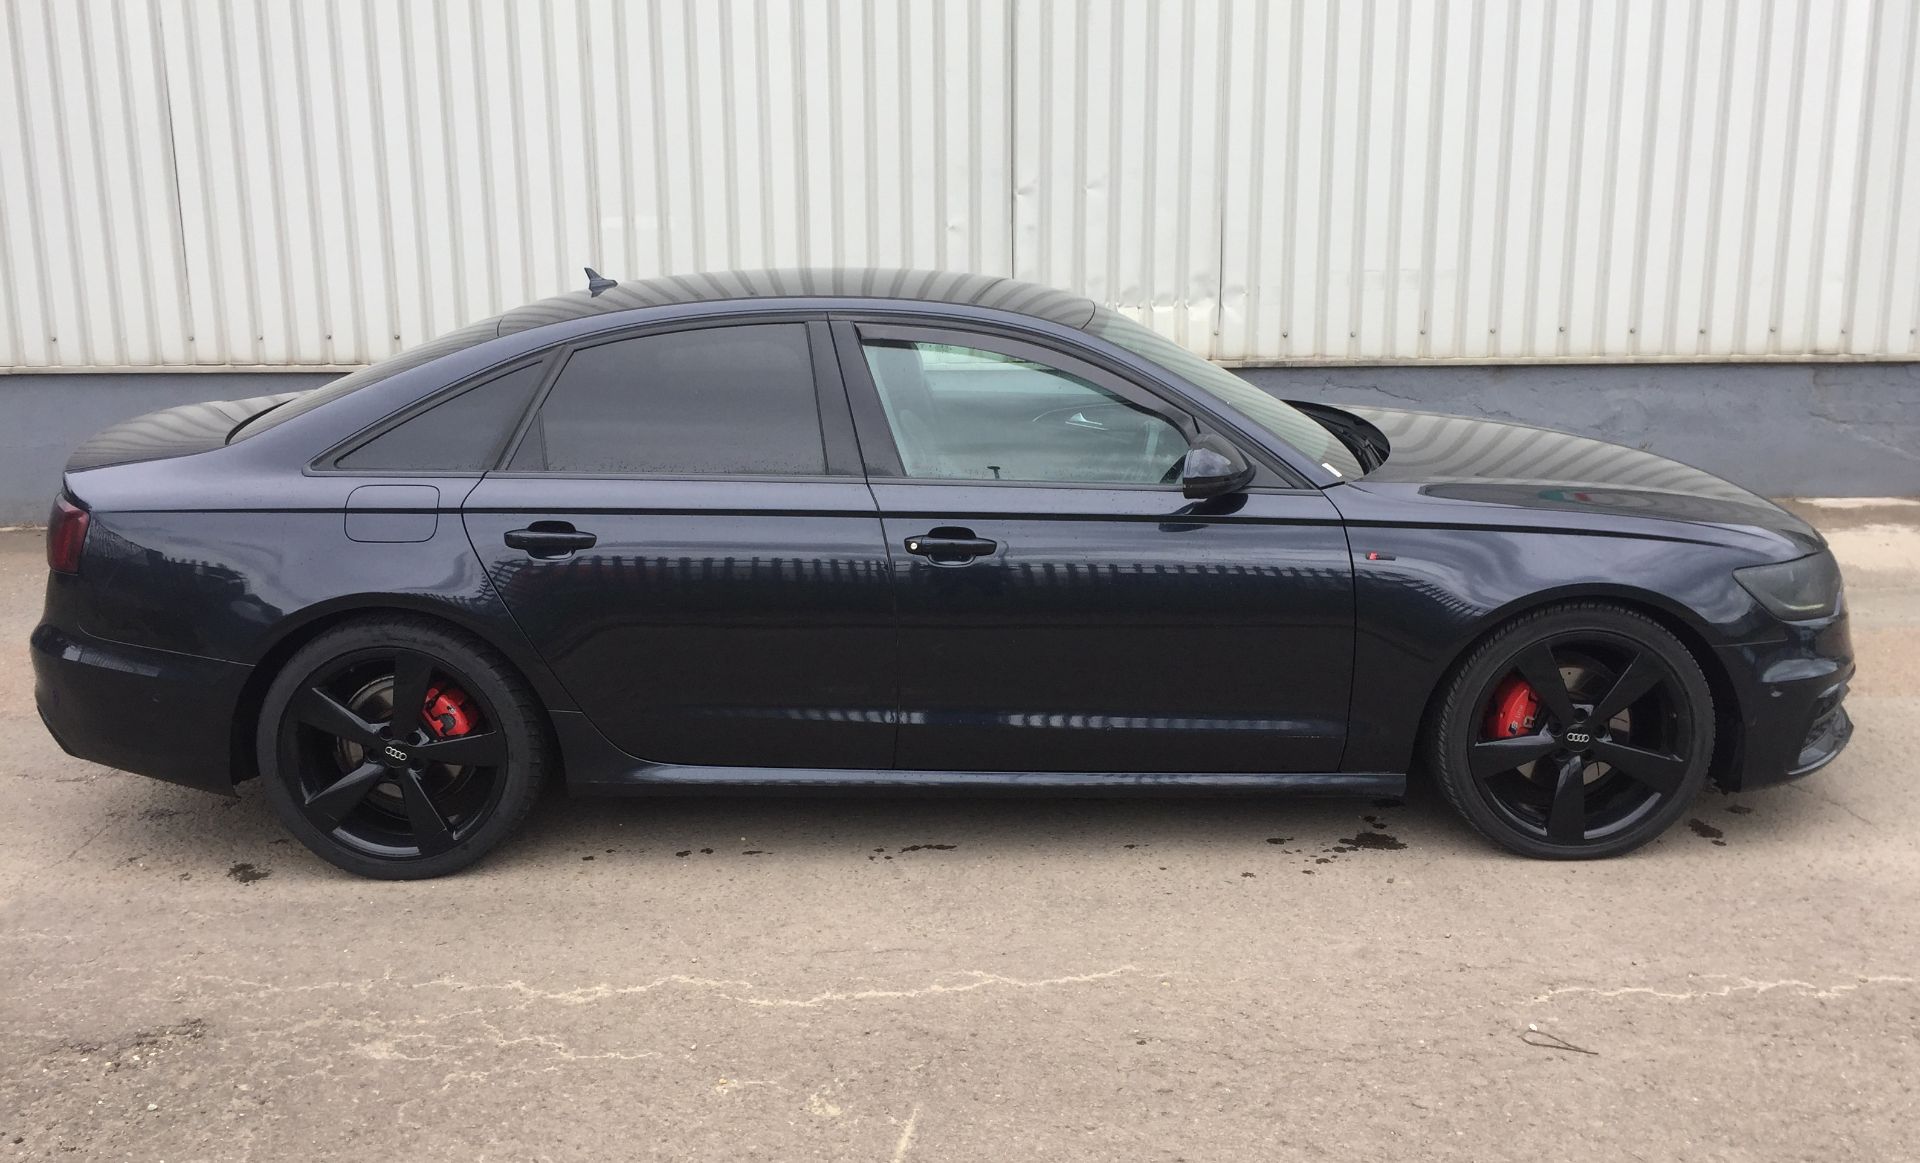 2013 Audi A6 2.0 Tdi S Line Black Edition 4 Dr Saloon - CL505 - NO VAT ON THE HAMMER - Location: Cor - Image 4 of 20